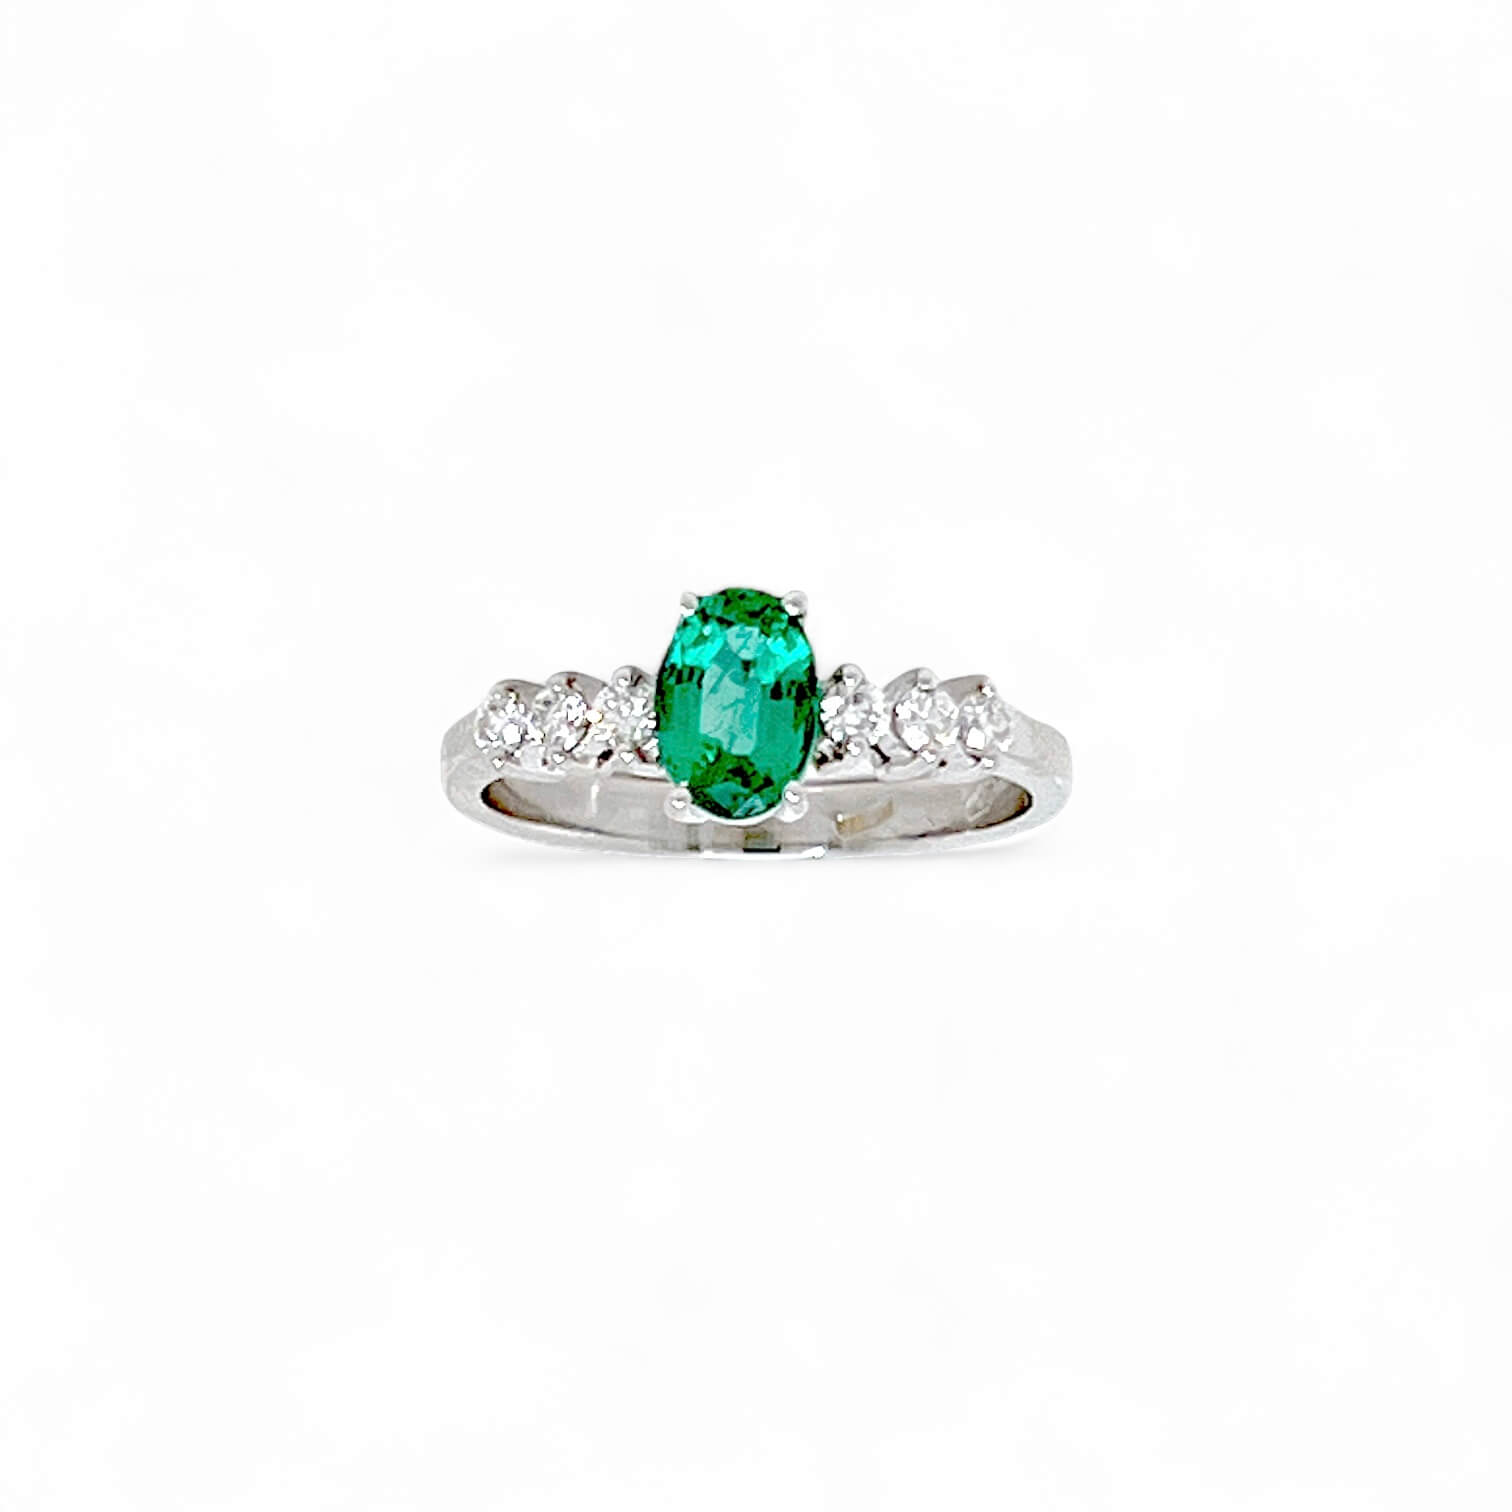 750% White Gold Emerald Ring